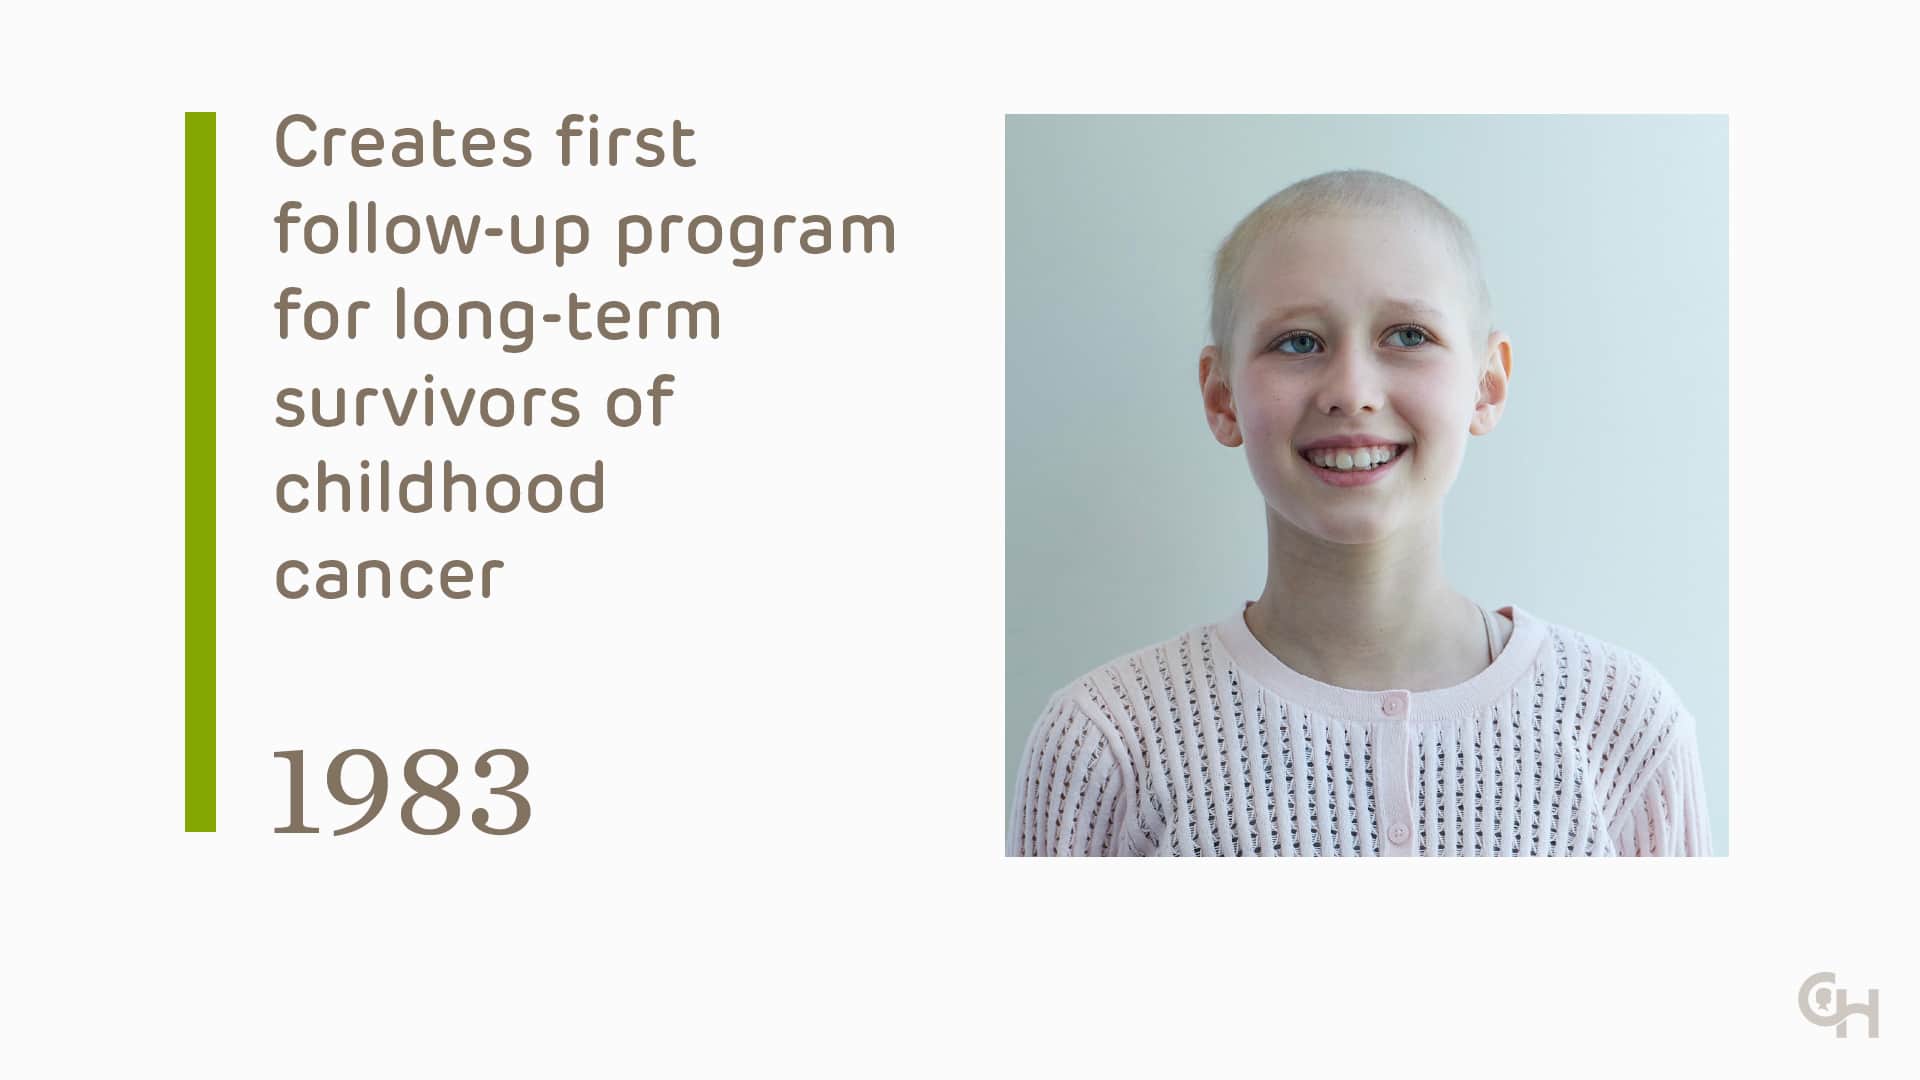 Creates first follow-up program for long-term survivors of childhood cancer - 1983